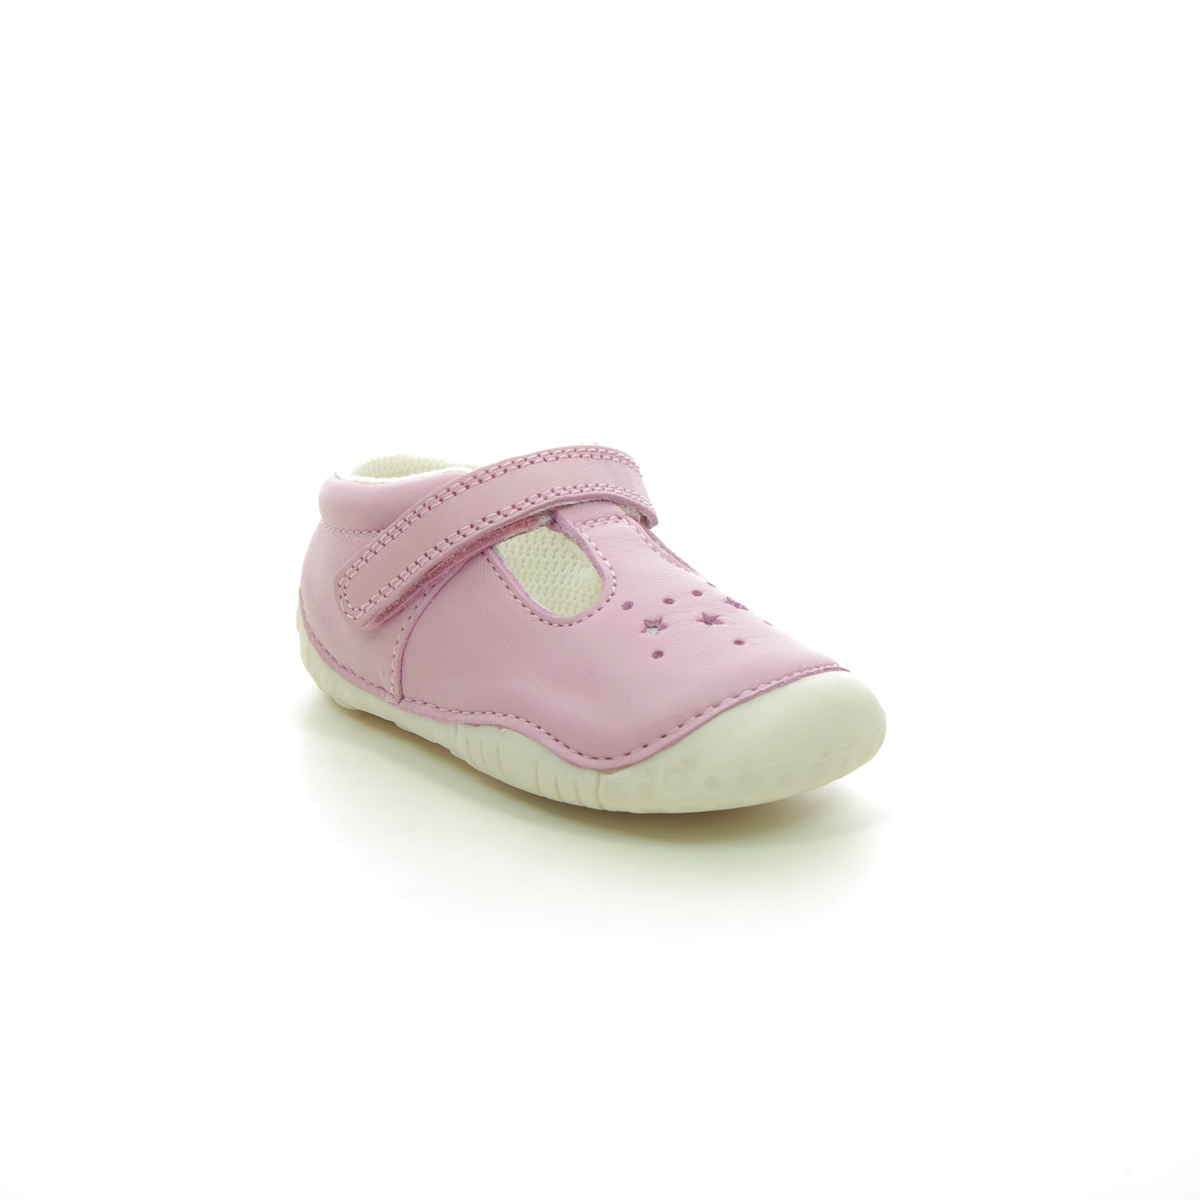 Start Rite Tumble T Bar Pink Leather Kids girls first and baby shoes 0761-66F in a Plain Leather in Size 2.5